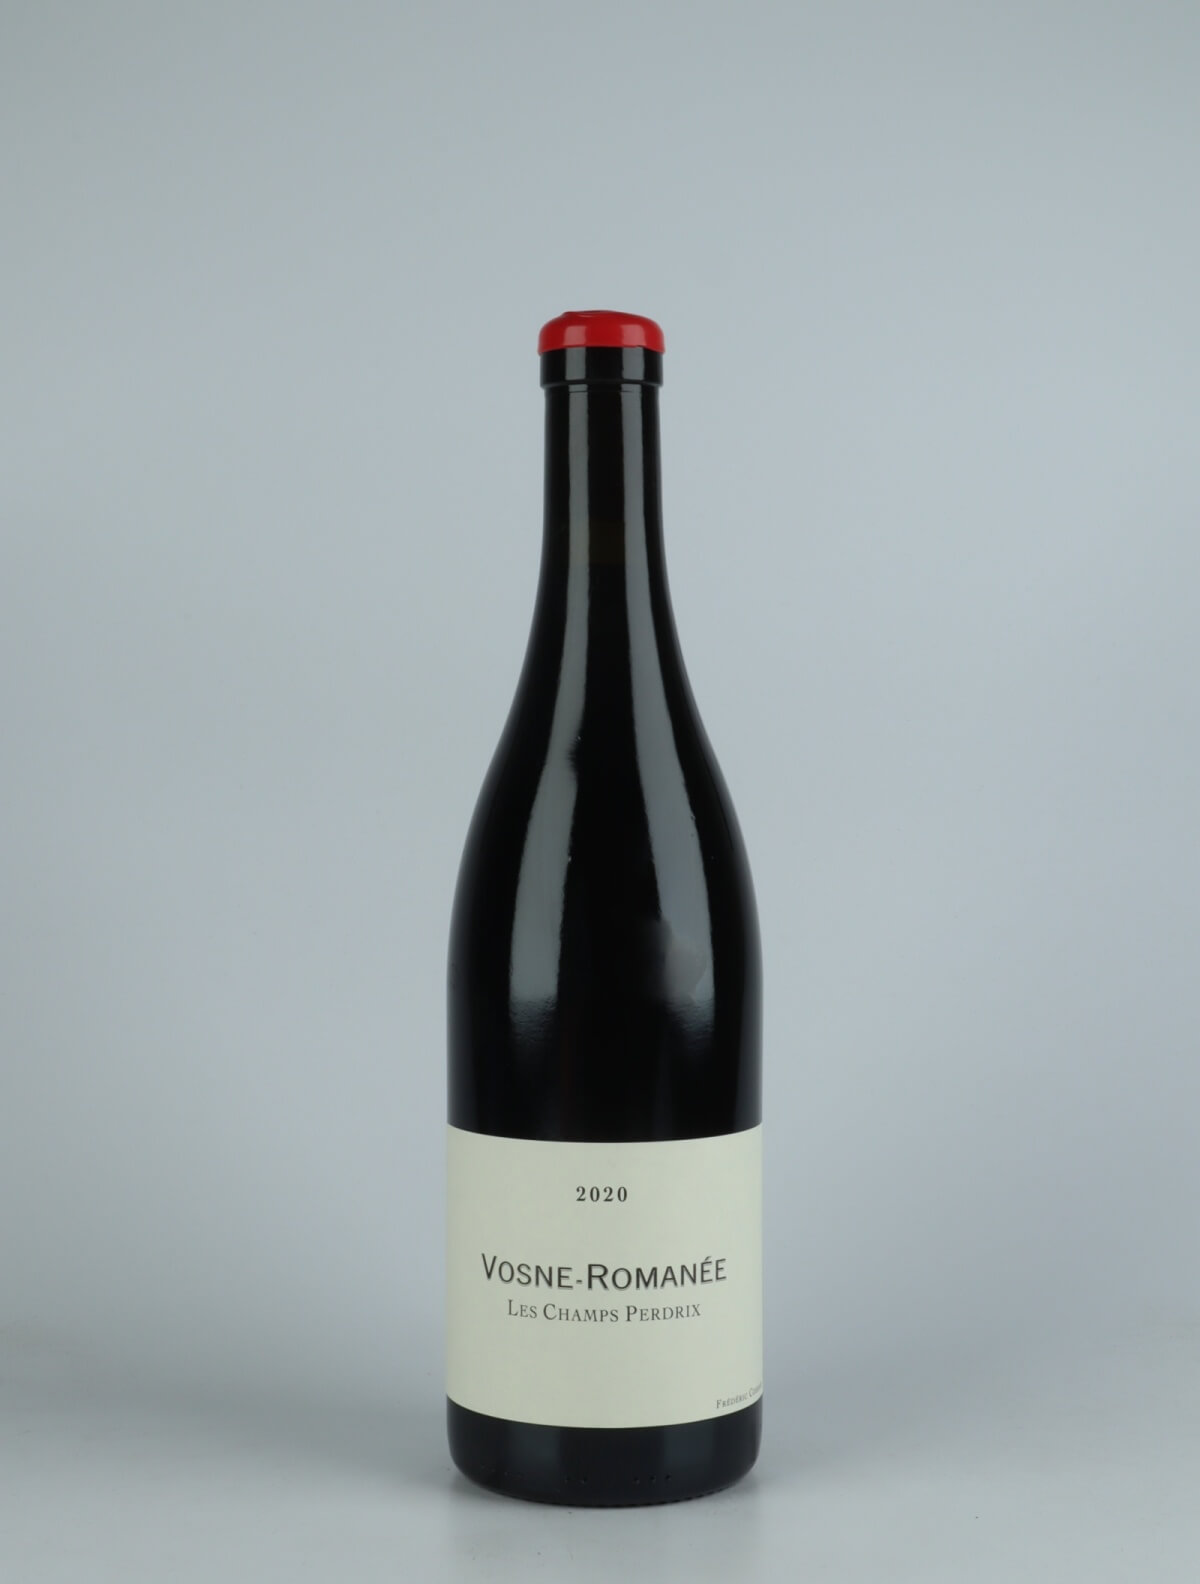 A bottle 2020 Vosne Romanée - Les Champs Perdrix Red wine from Frédéric Cossard, Burgundy in France